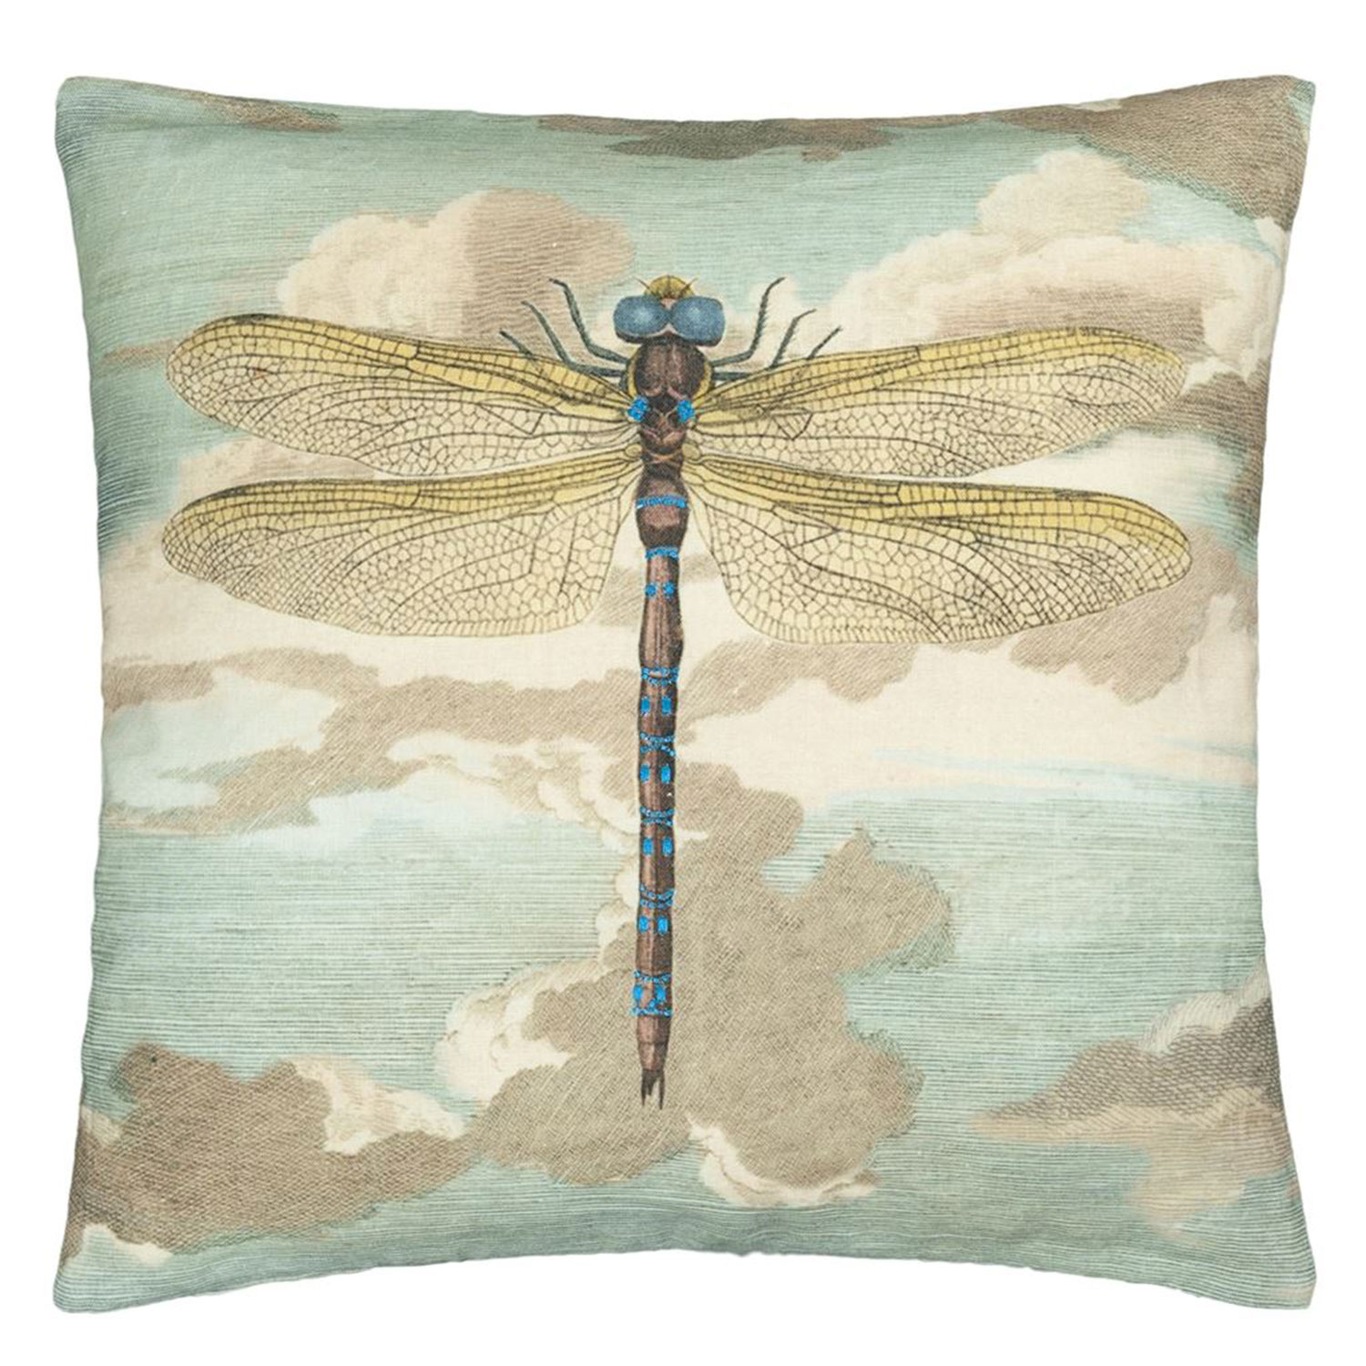 Dragonfly Over Clouds Cushion 50x50 cm, Sky Blue